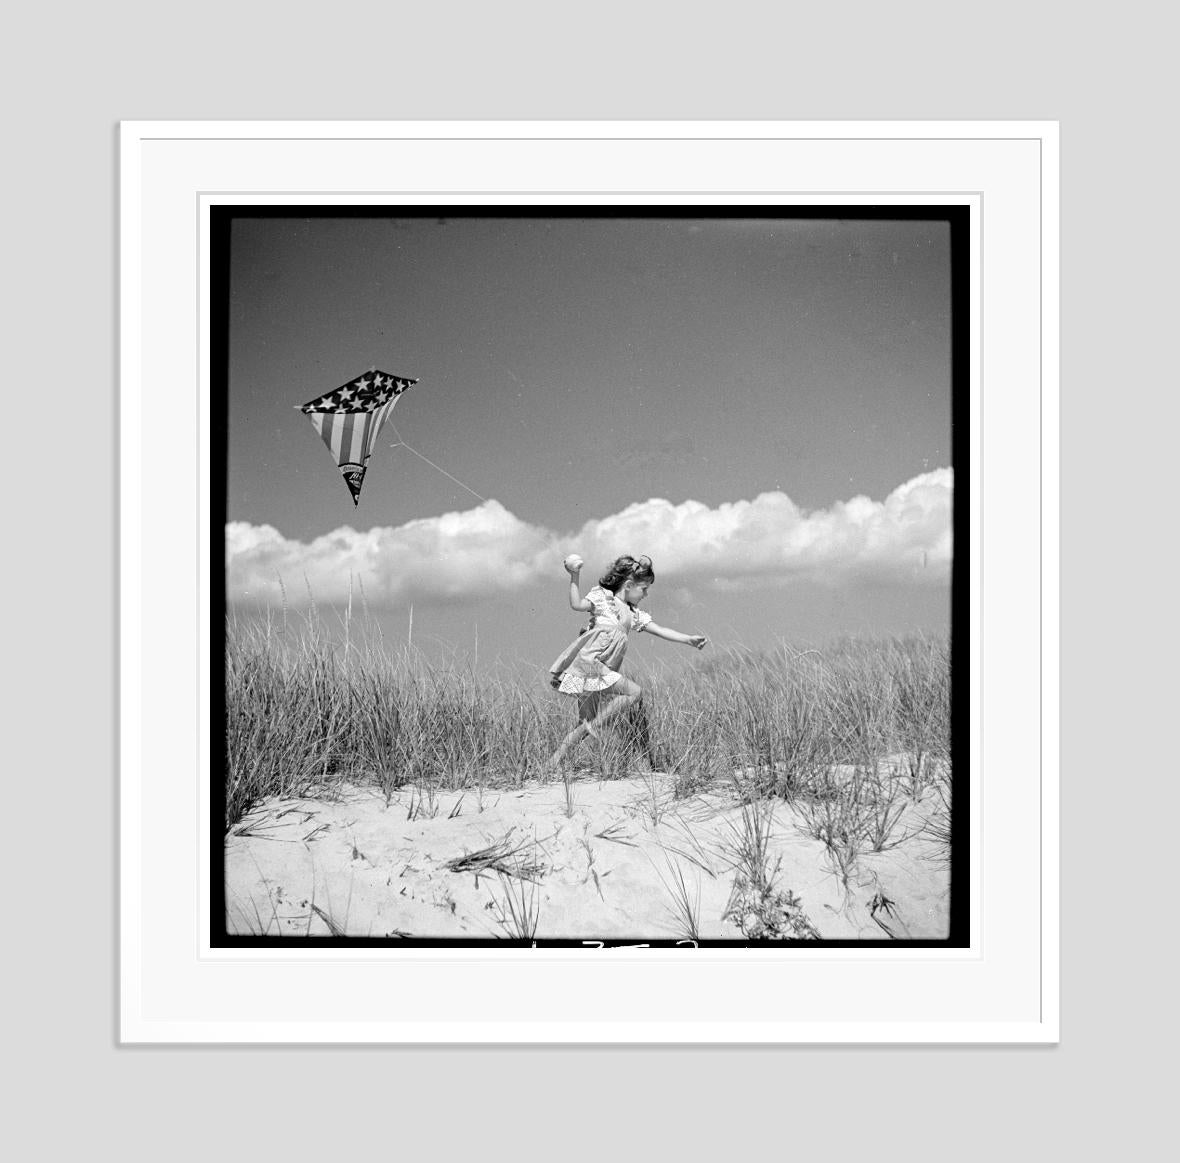 The Wind 1944 Oversize Limited Signature Stamped Edition  - Modern Photograph by Toni Frissell